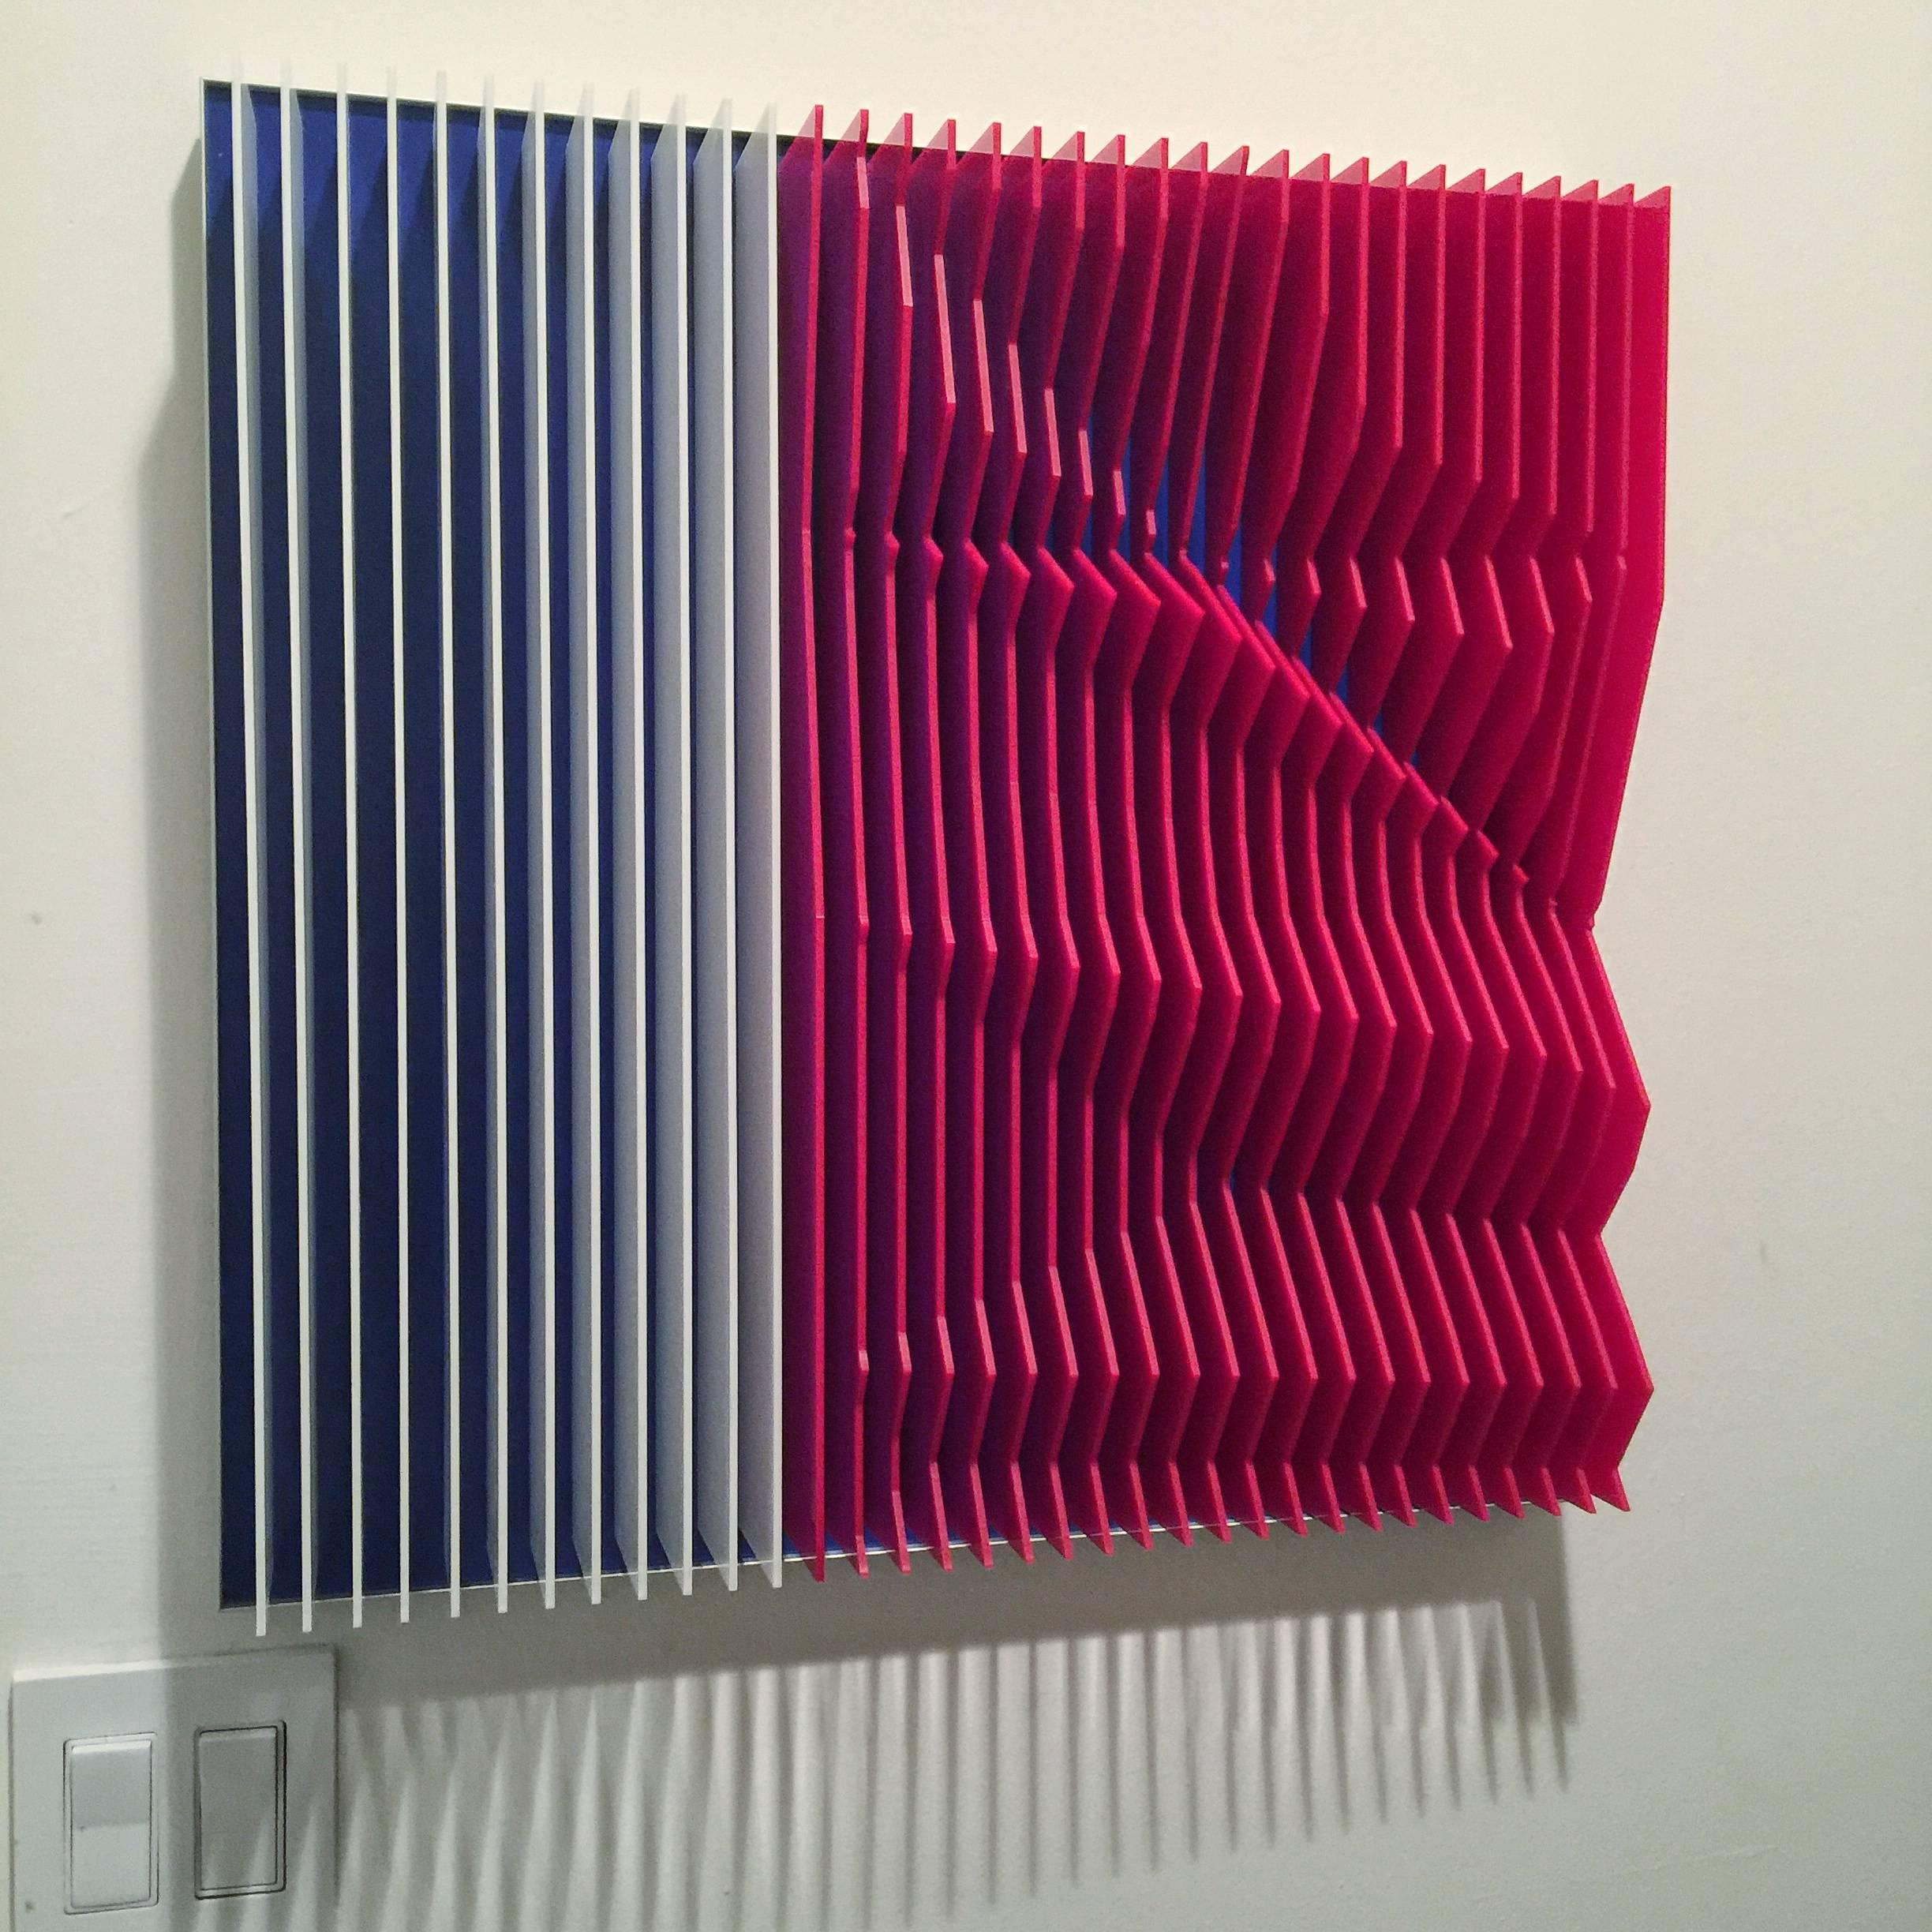 Purple within - kinetic wall sculpture by J. Margulis - Mixed Media Art by Jose Margulis